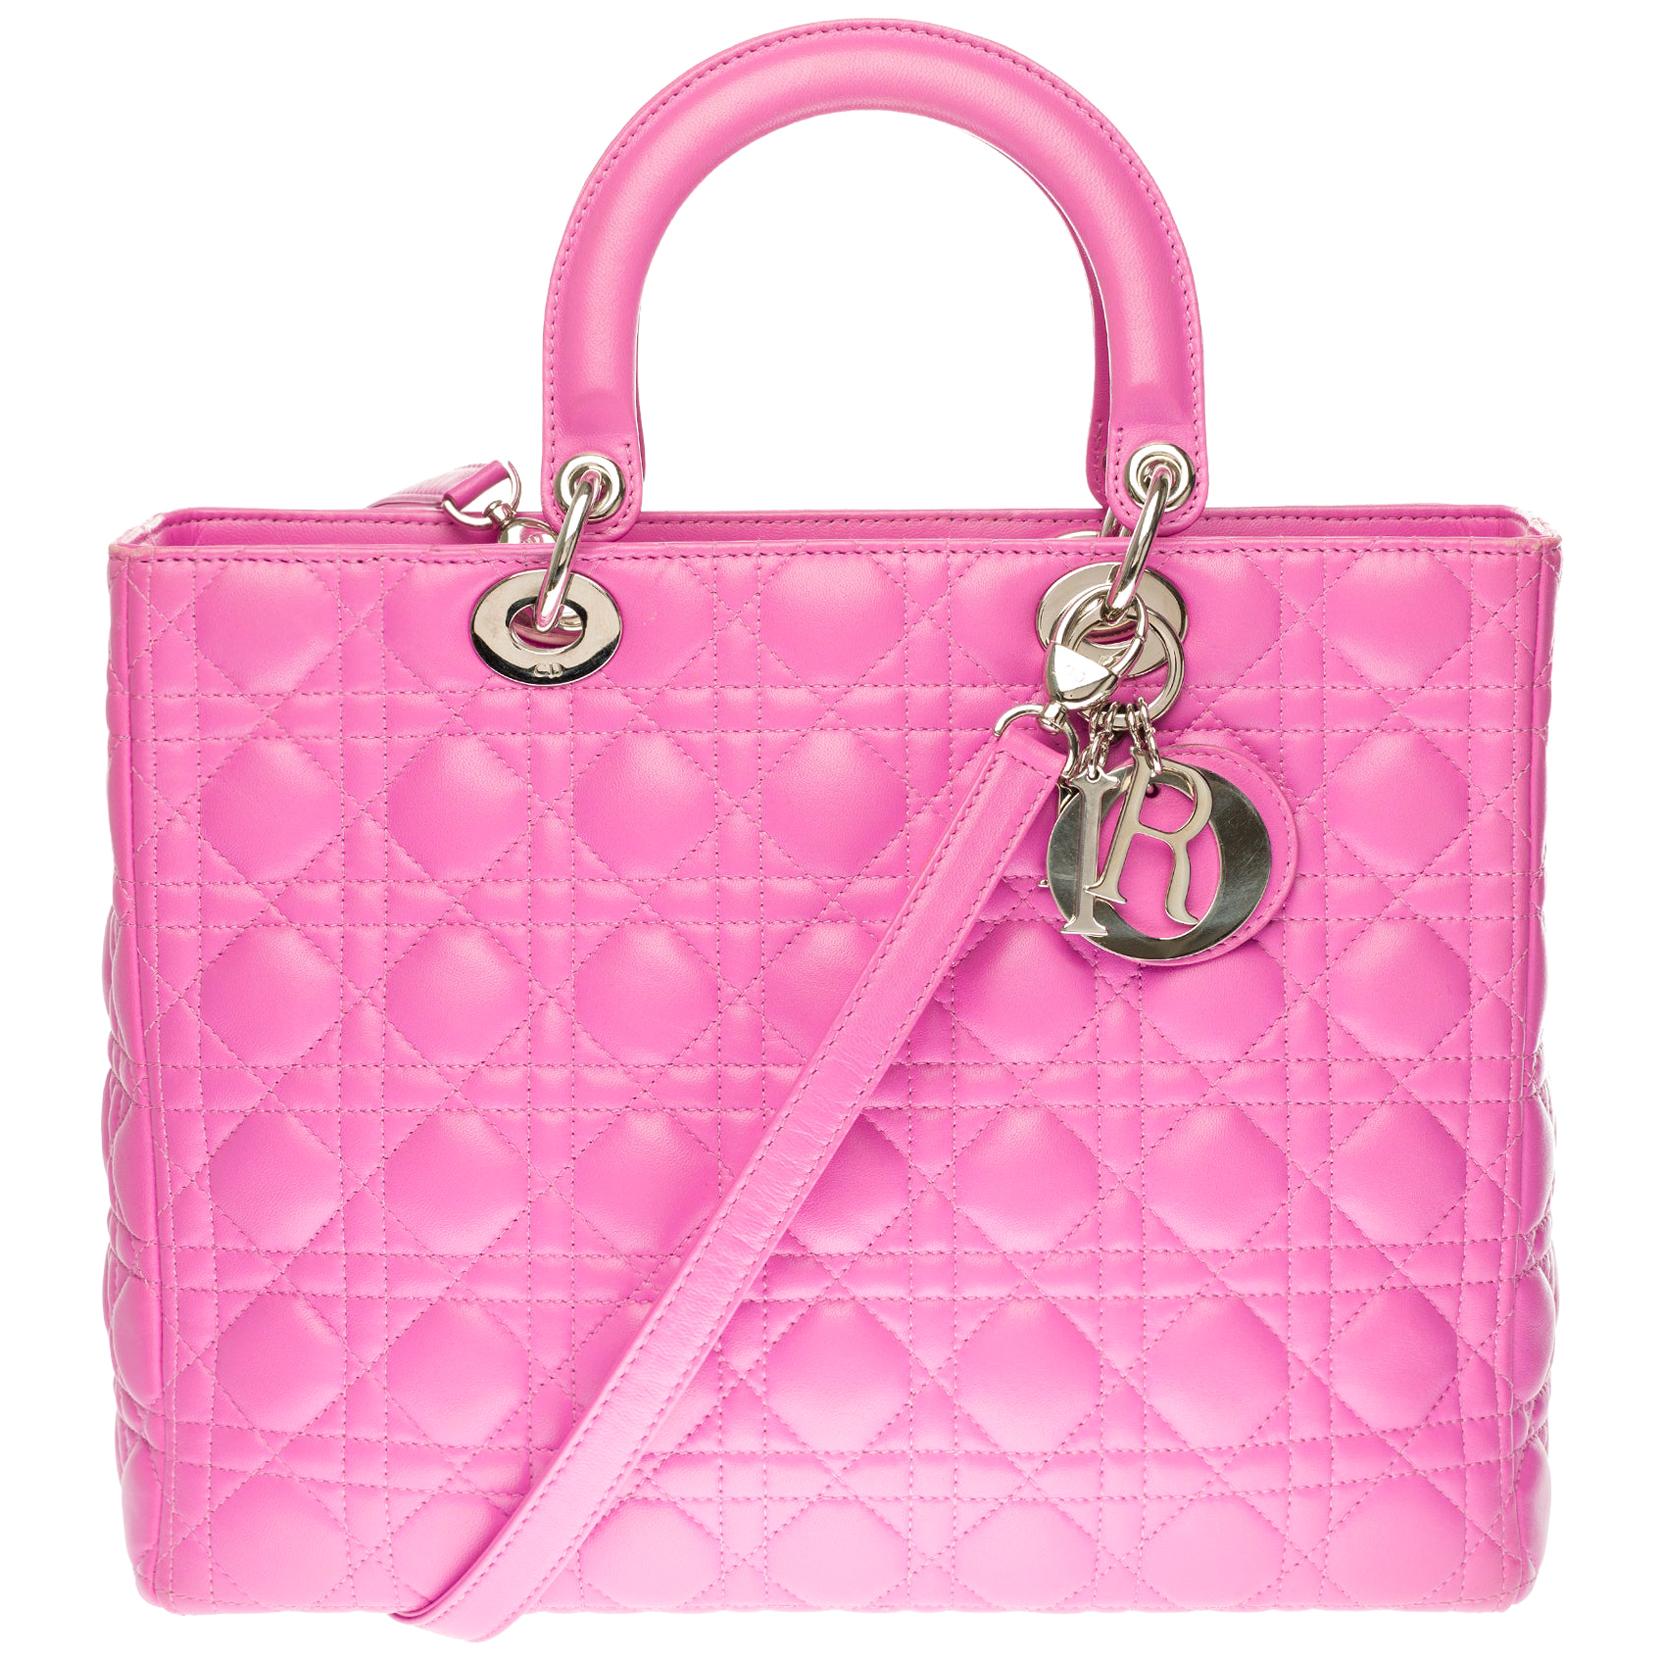 Lady Dior GM ( large model) shoulder bag with strap in pink cannage leather, SHW